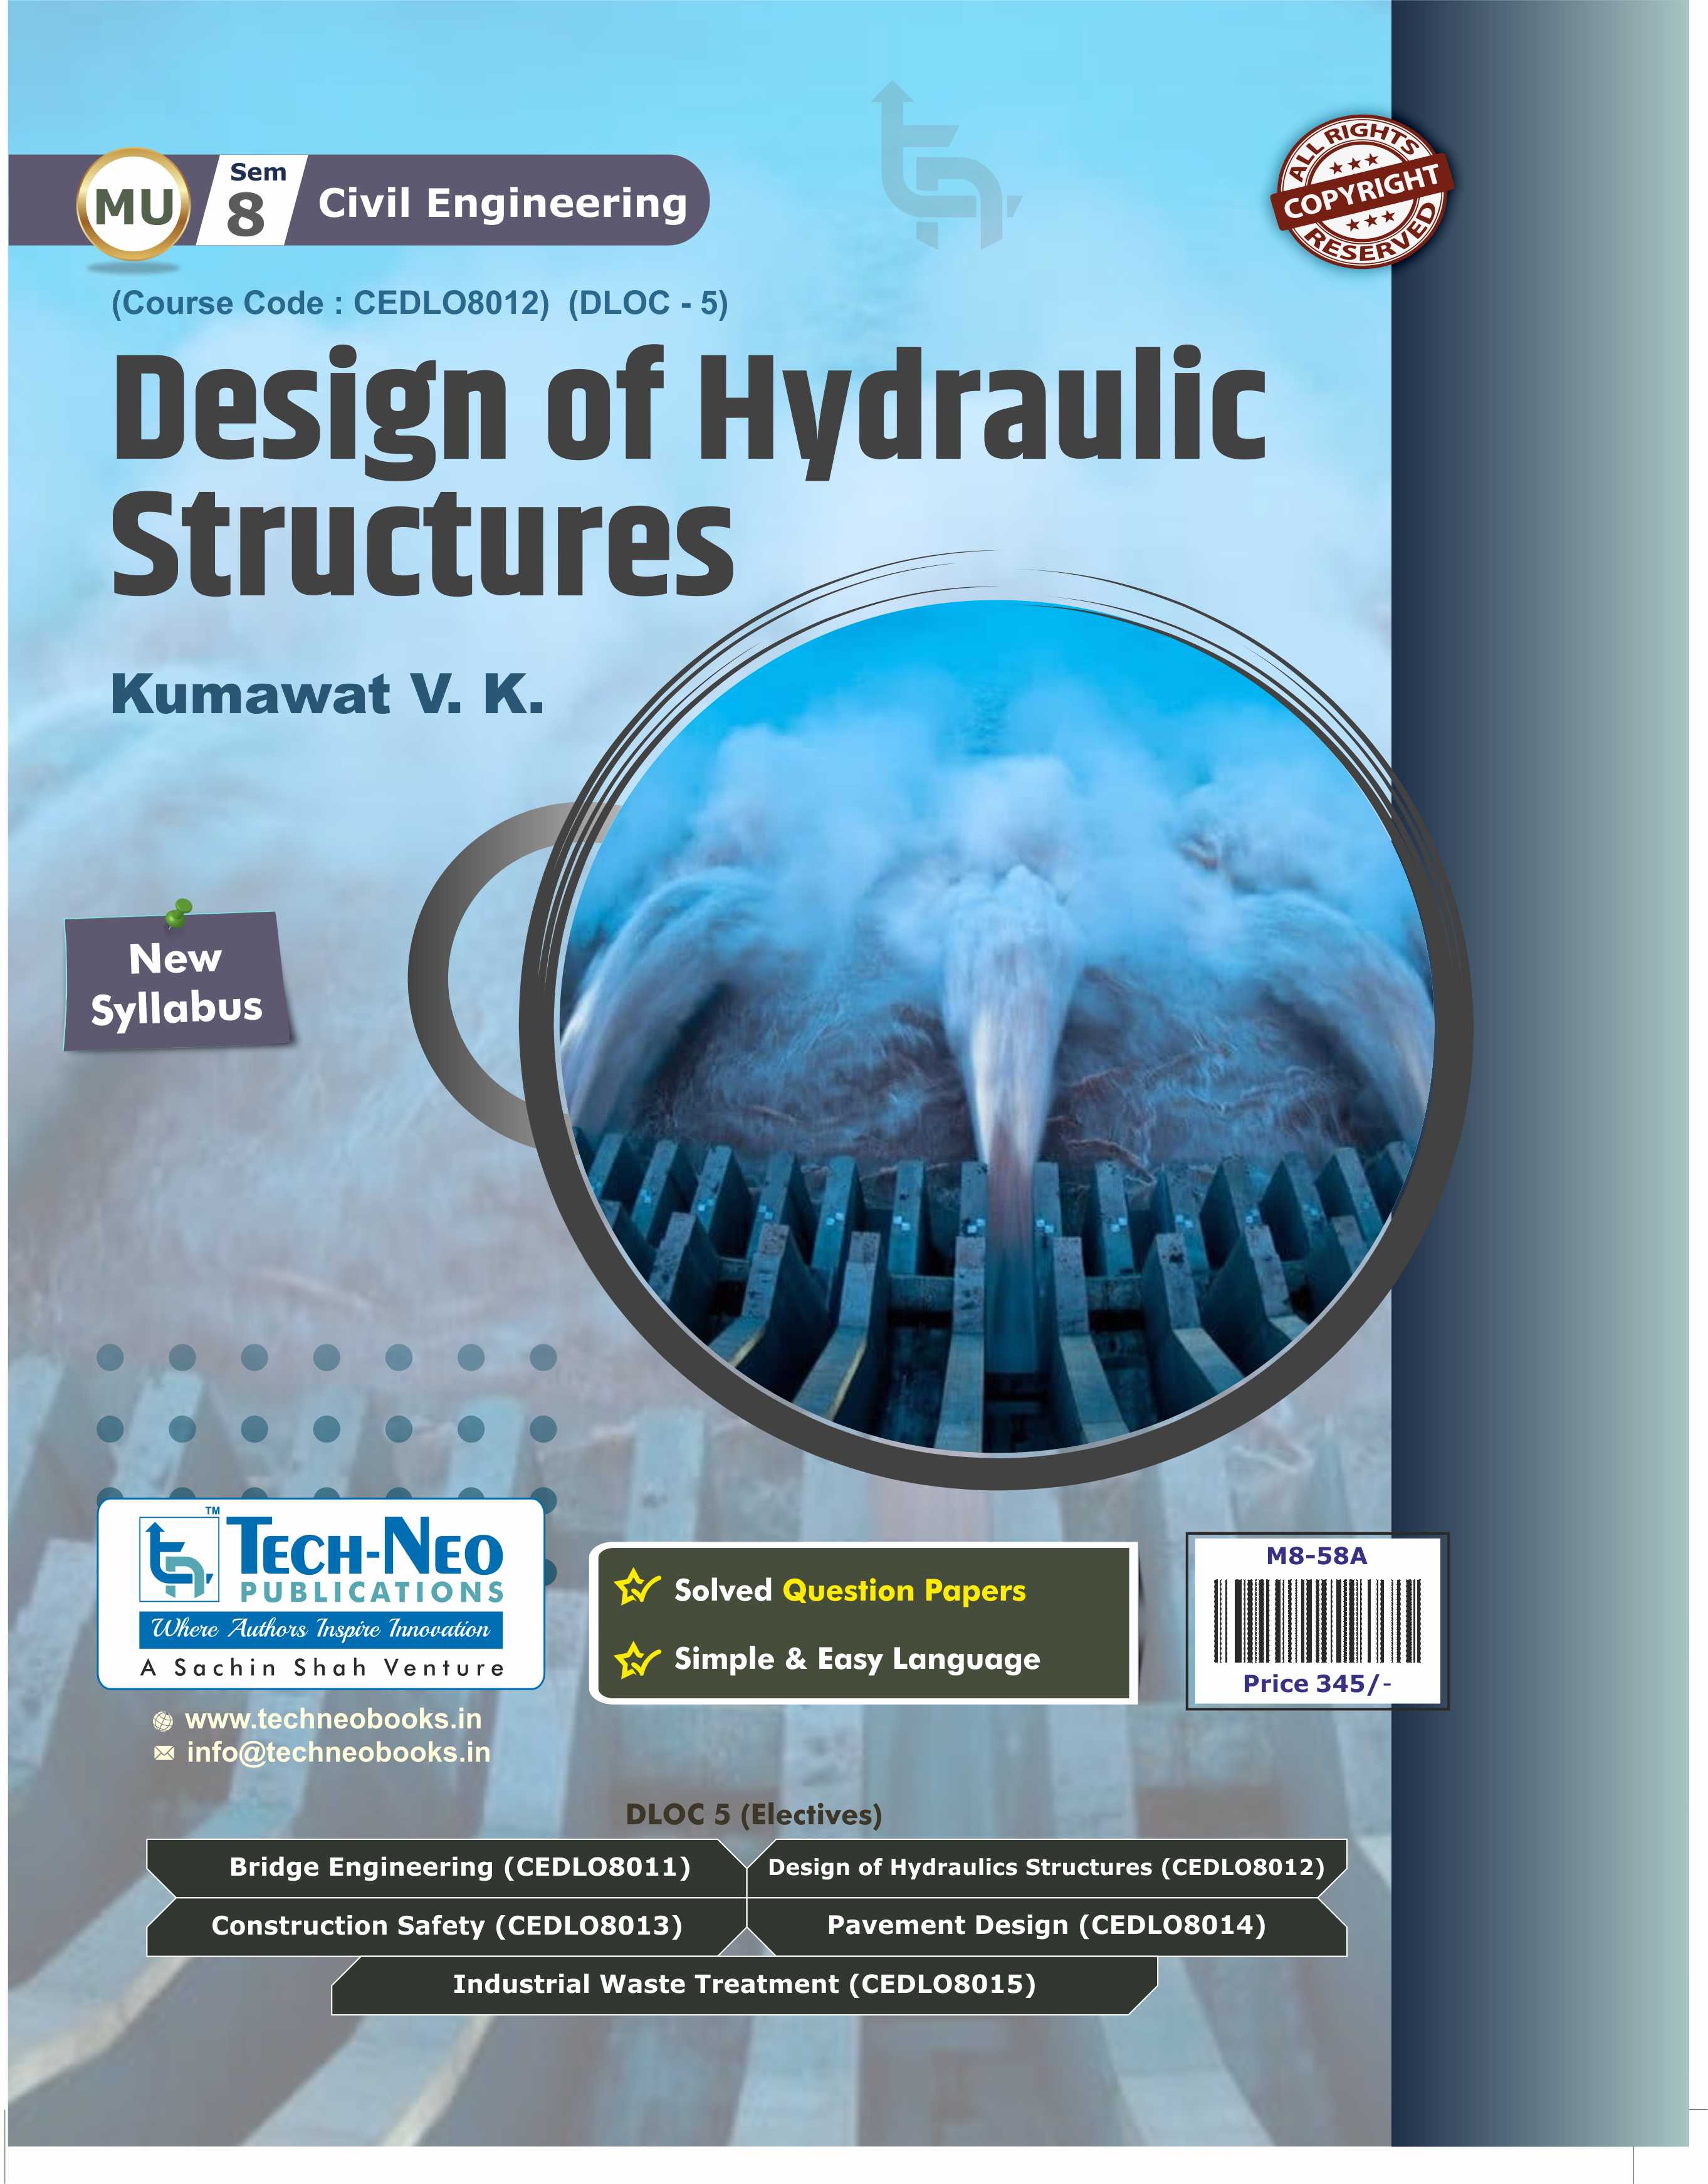 Design of Hydraulic Structures